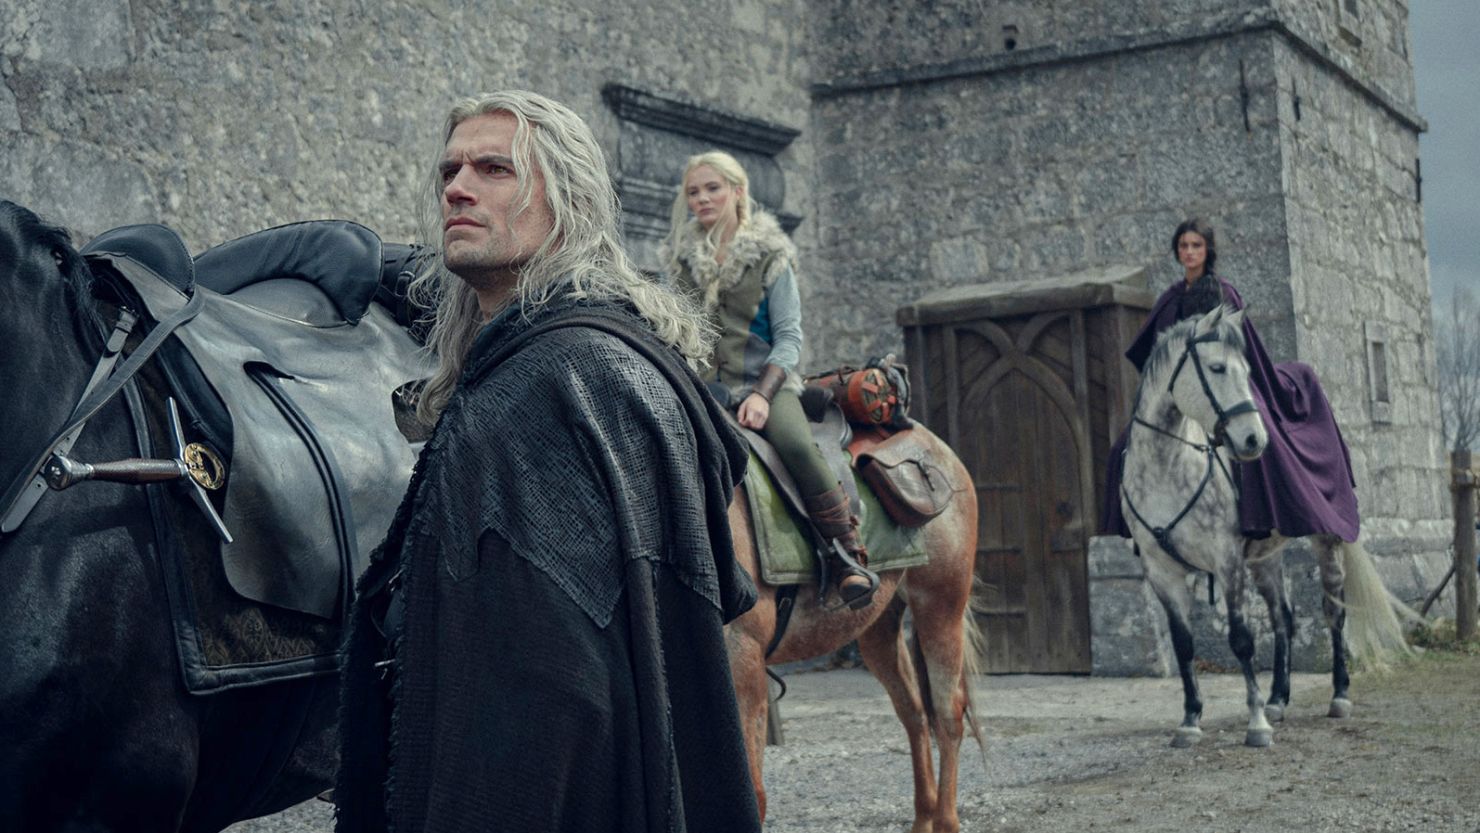 The Witcher season 3 volume 1 review: setting up a finale for Henry  Cavill's Geralt - The Verge